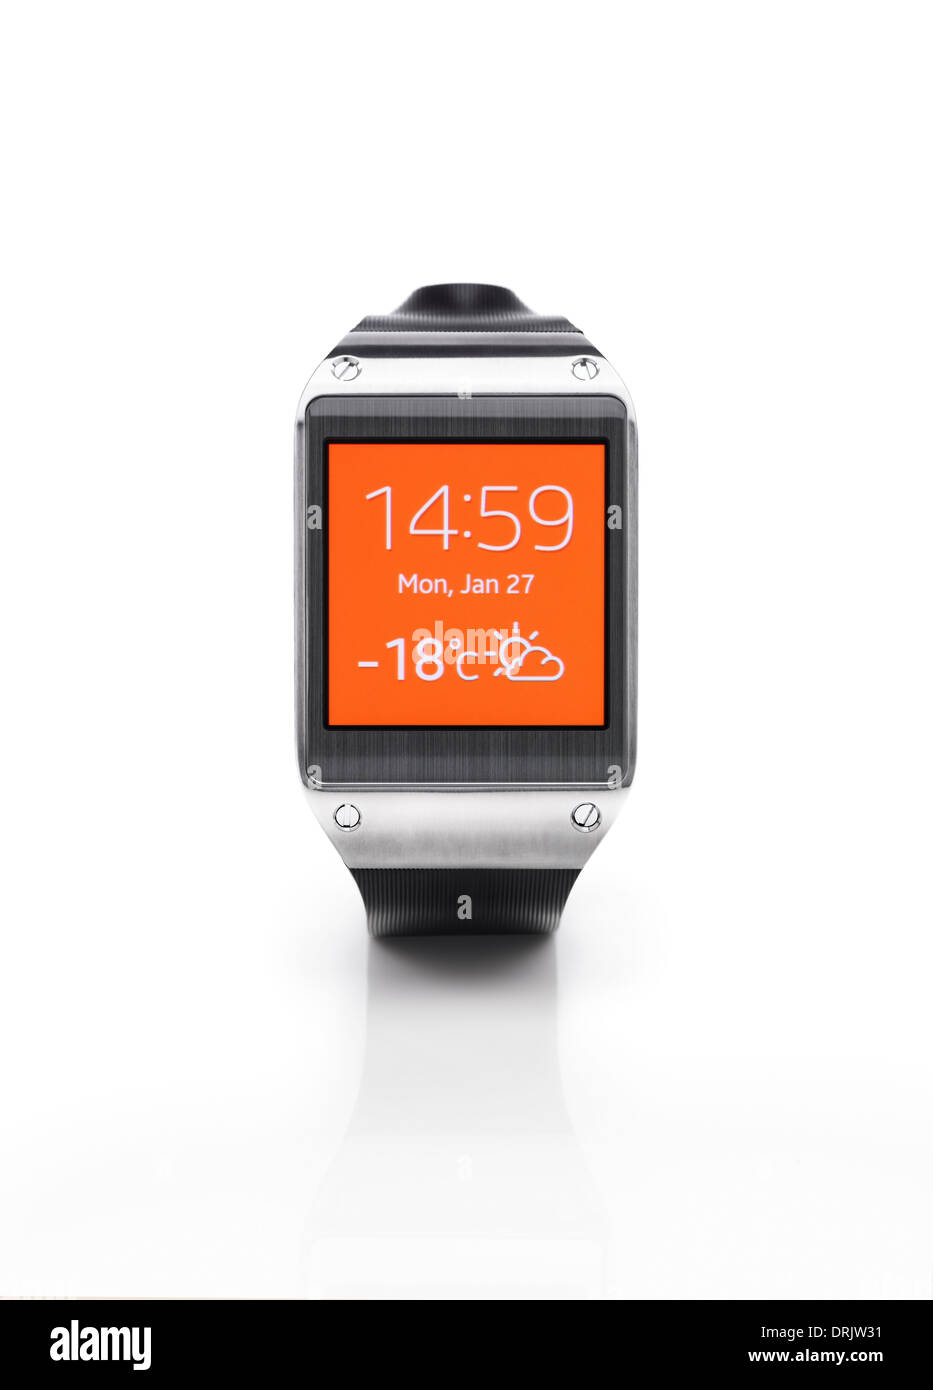 Samsung Galaxy Gear smartwatch. Isolated watch on white background with clipping path. Stock Photo